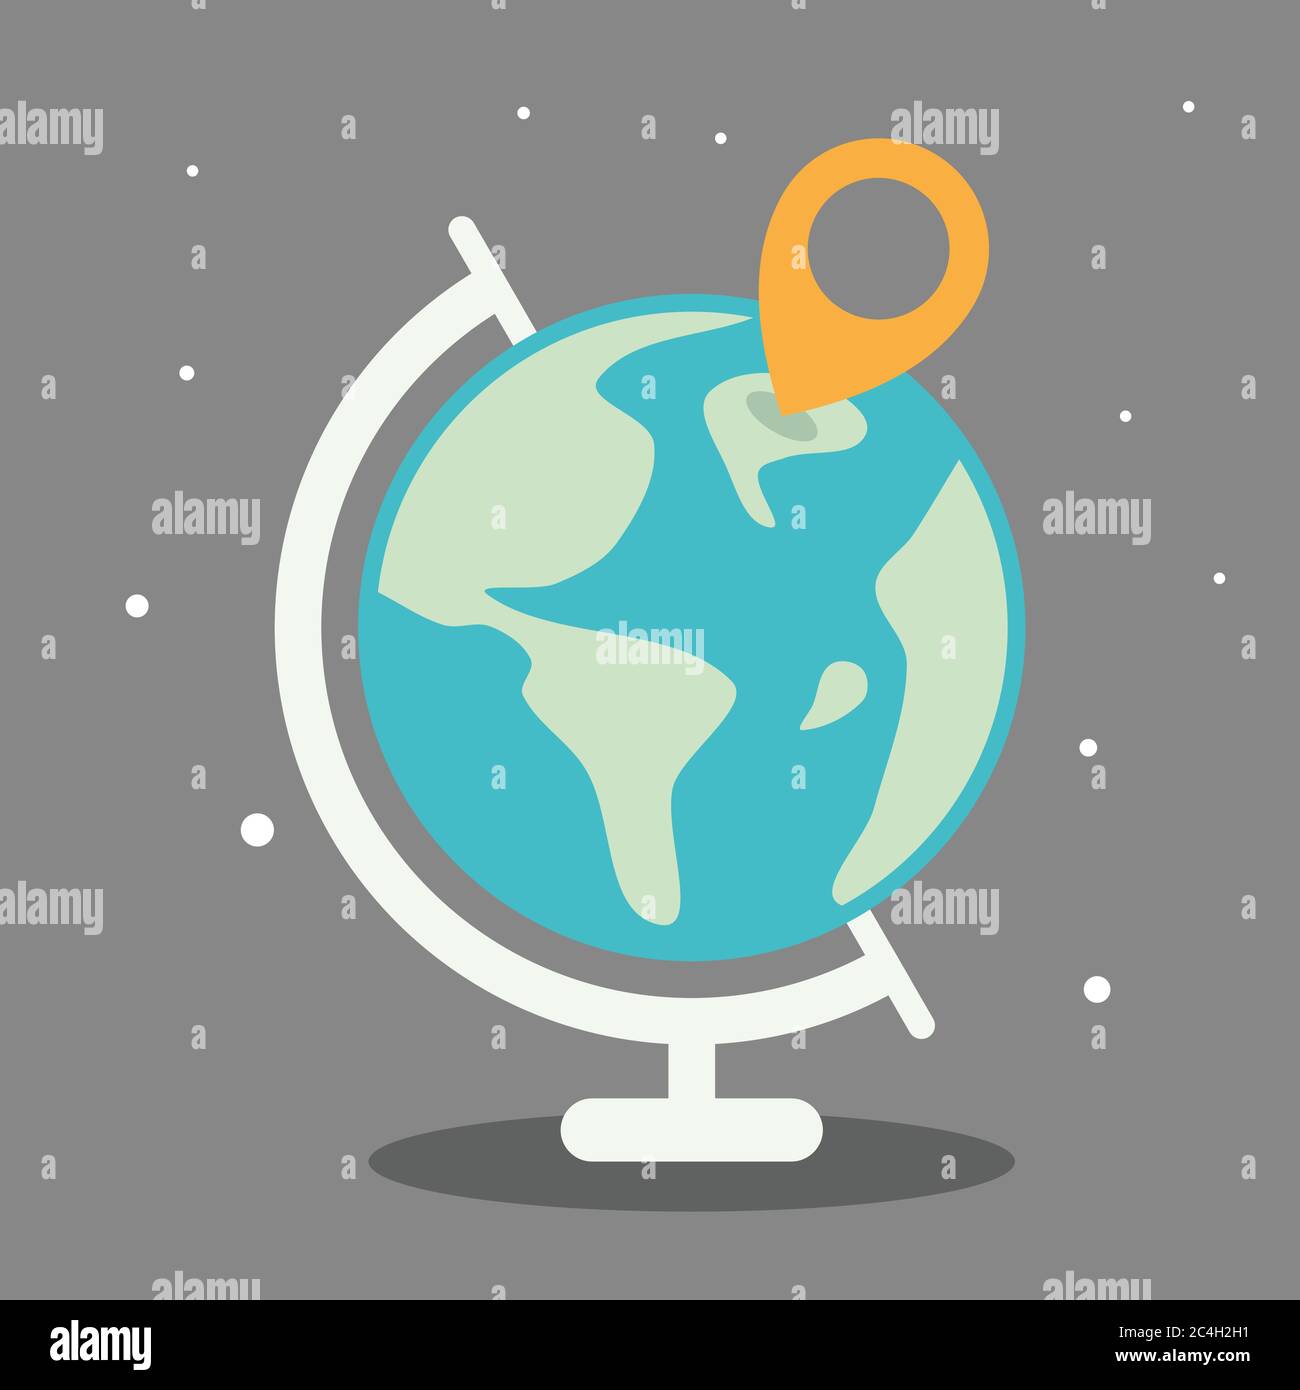 Globe with map pins icon from astronomy. Flat design planet earth for element design or background. Vector illustration EPS.8 EPS.10 Stock Vector